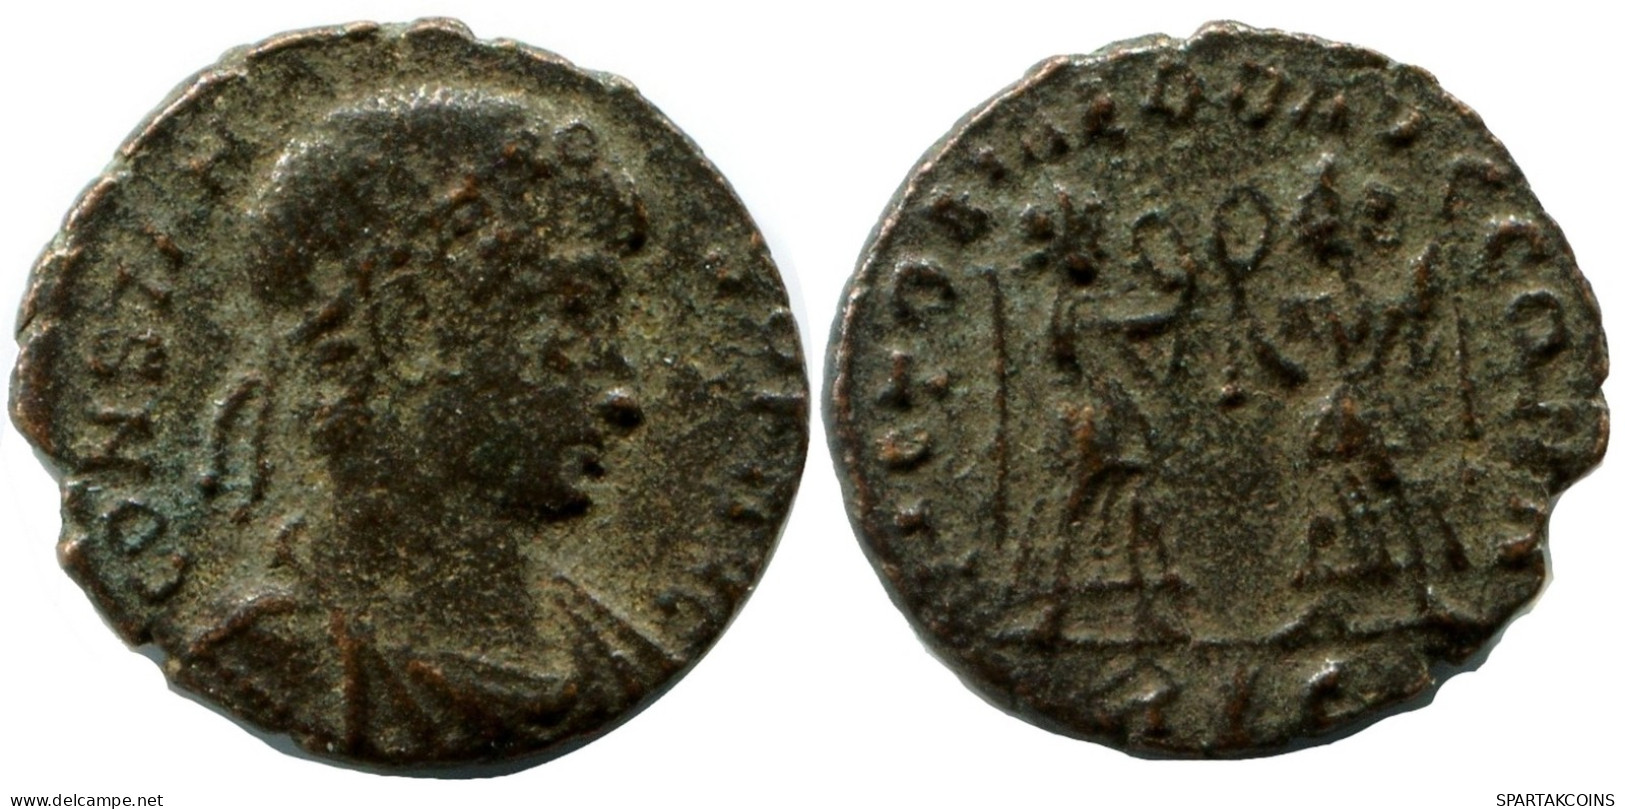 CONSTANS MINTED IN ROME ITALY FROM THE ROYAL ONTARIO MUSEUM #ANC11541.14.E.A - L'Empire Chrétien (307 à 363)